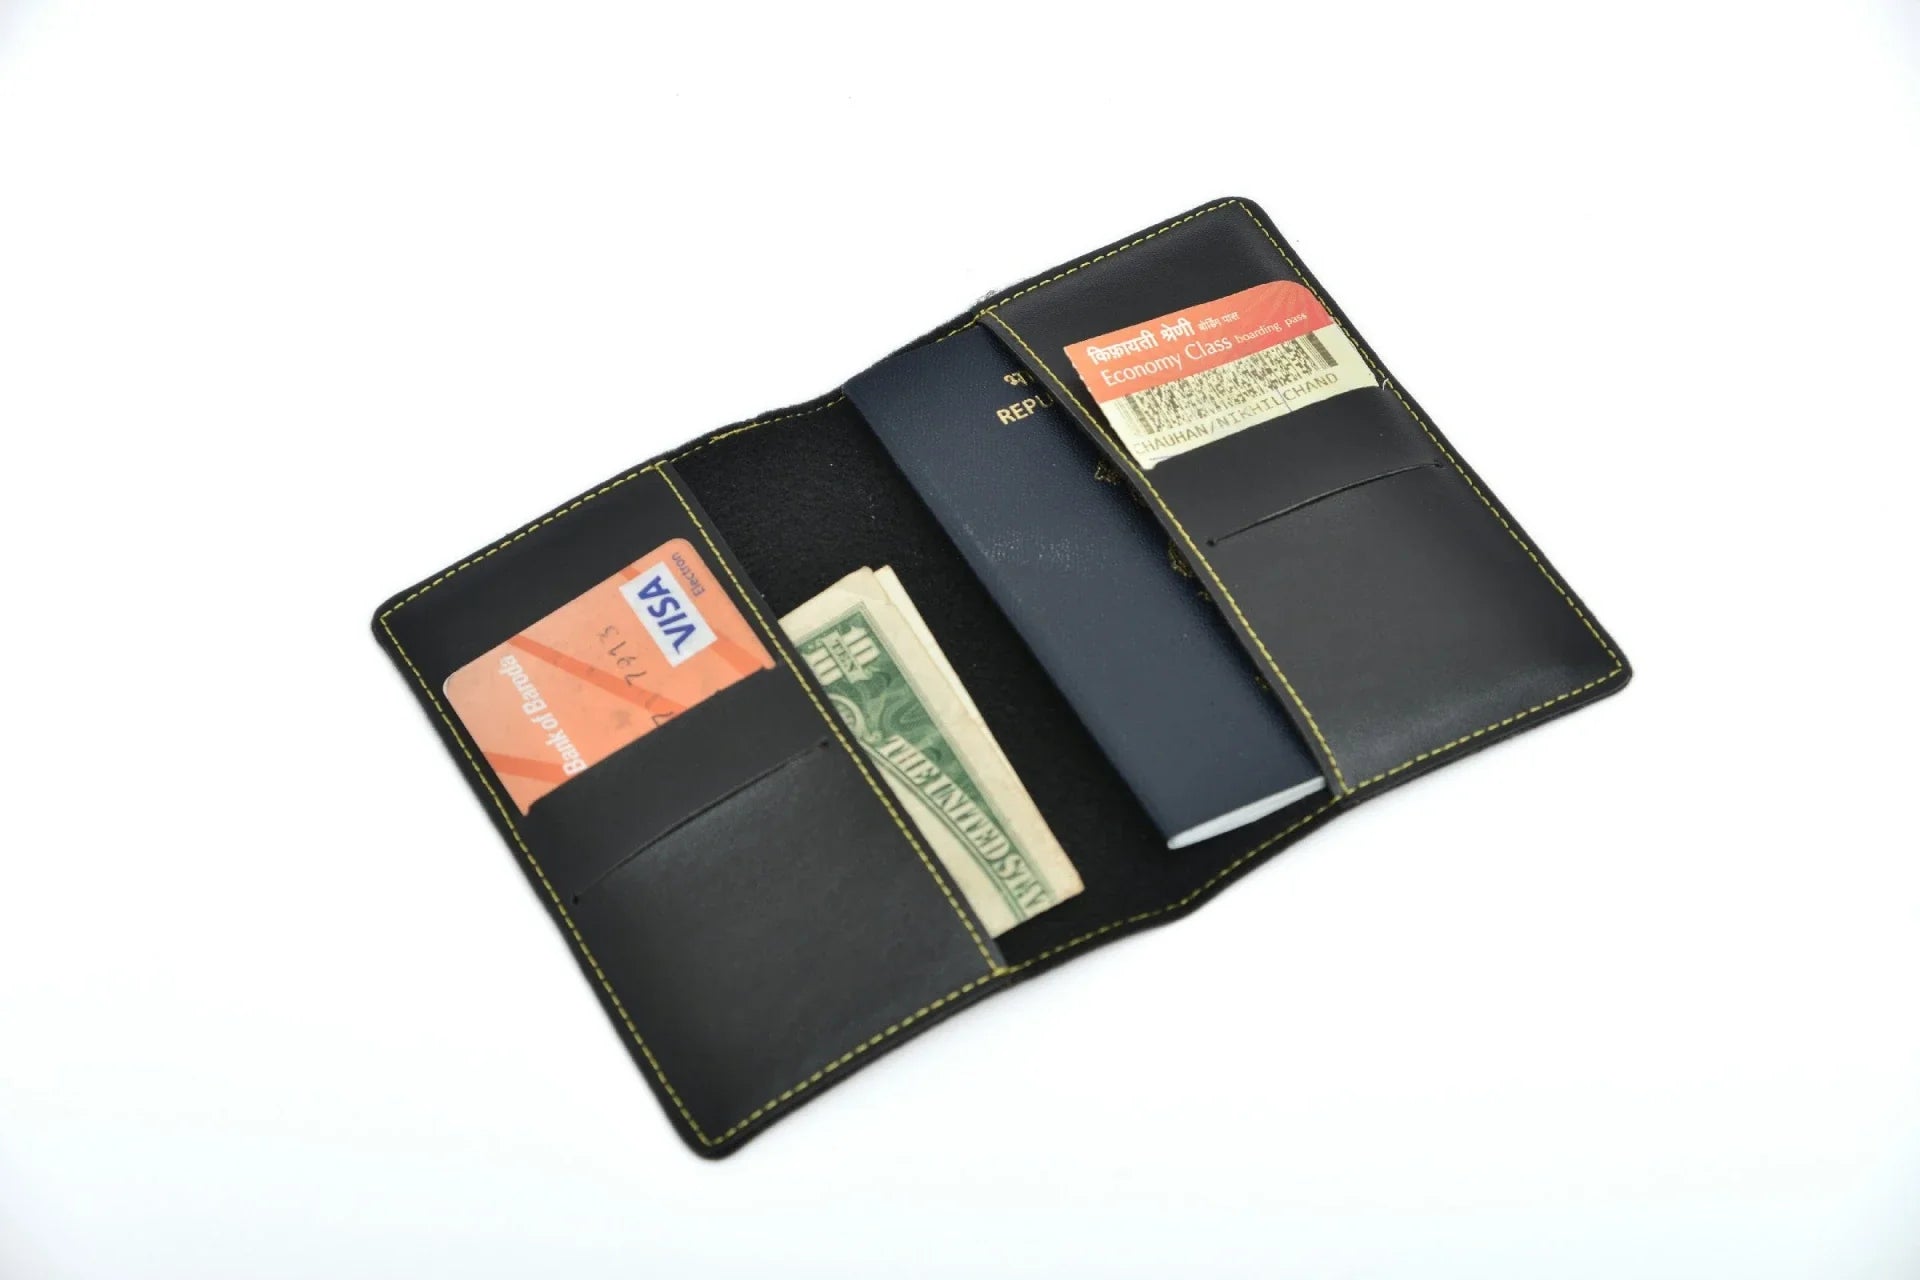 Inside or open view of black passport cover